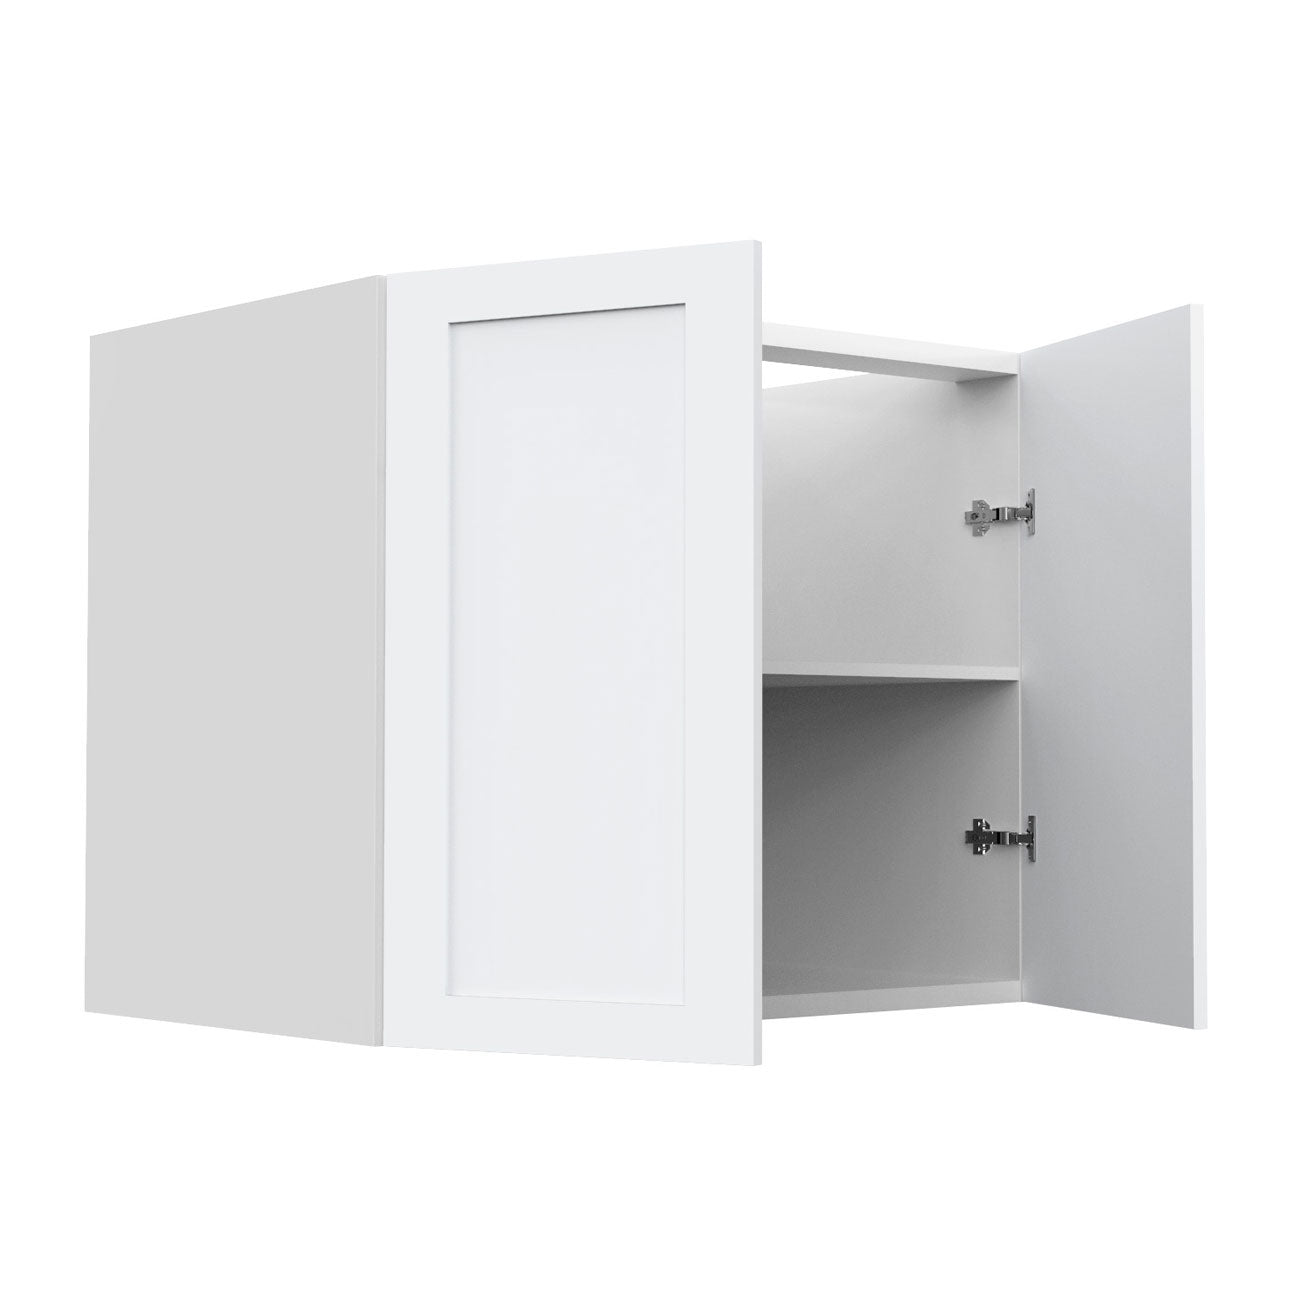 RTA - White Shaker - Full Height Double Door Base Cabinets | 36"W x 34.5"H x 24"D